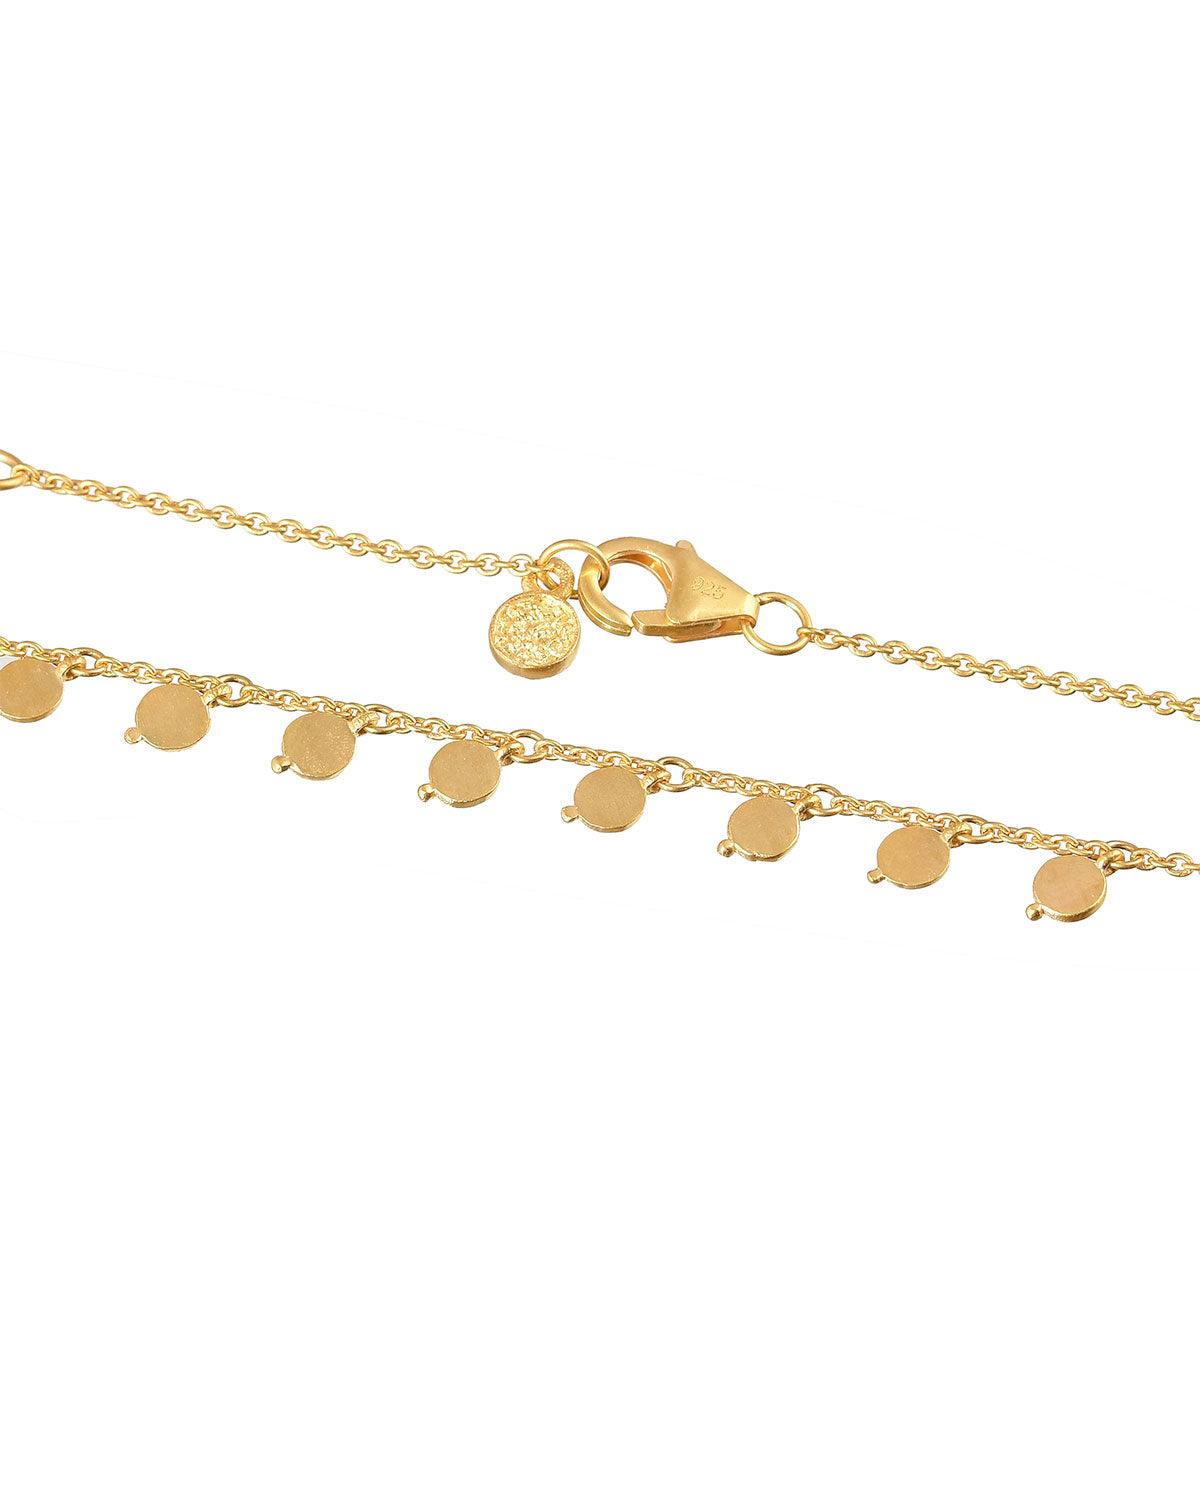 Exceptionally Cute Multi Disk Gold Choker Necklace - Moon London